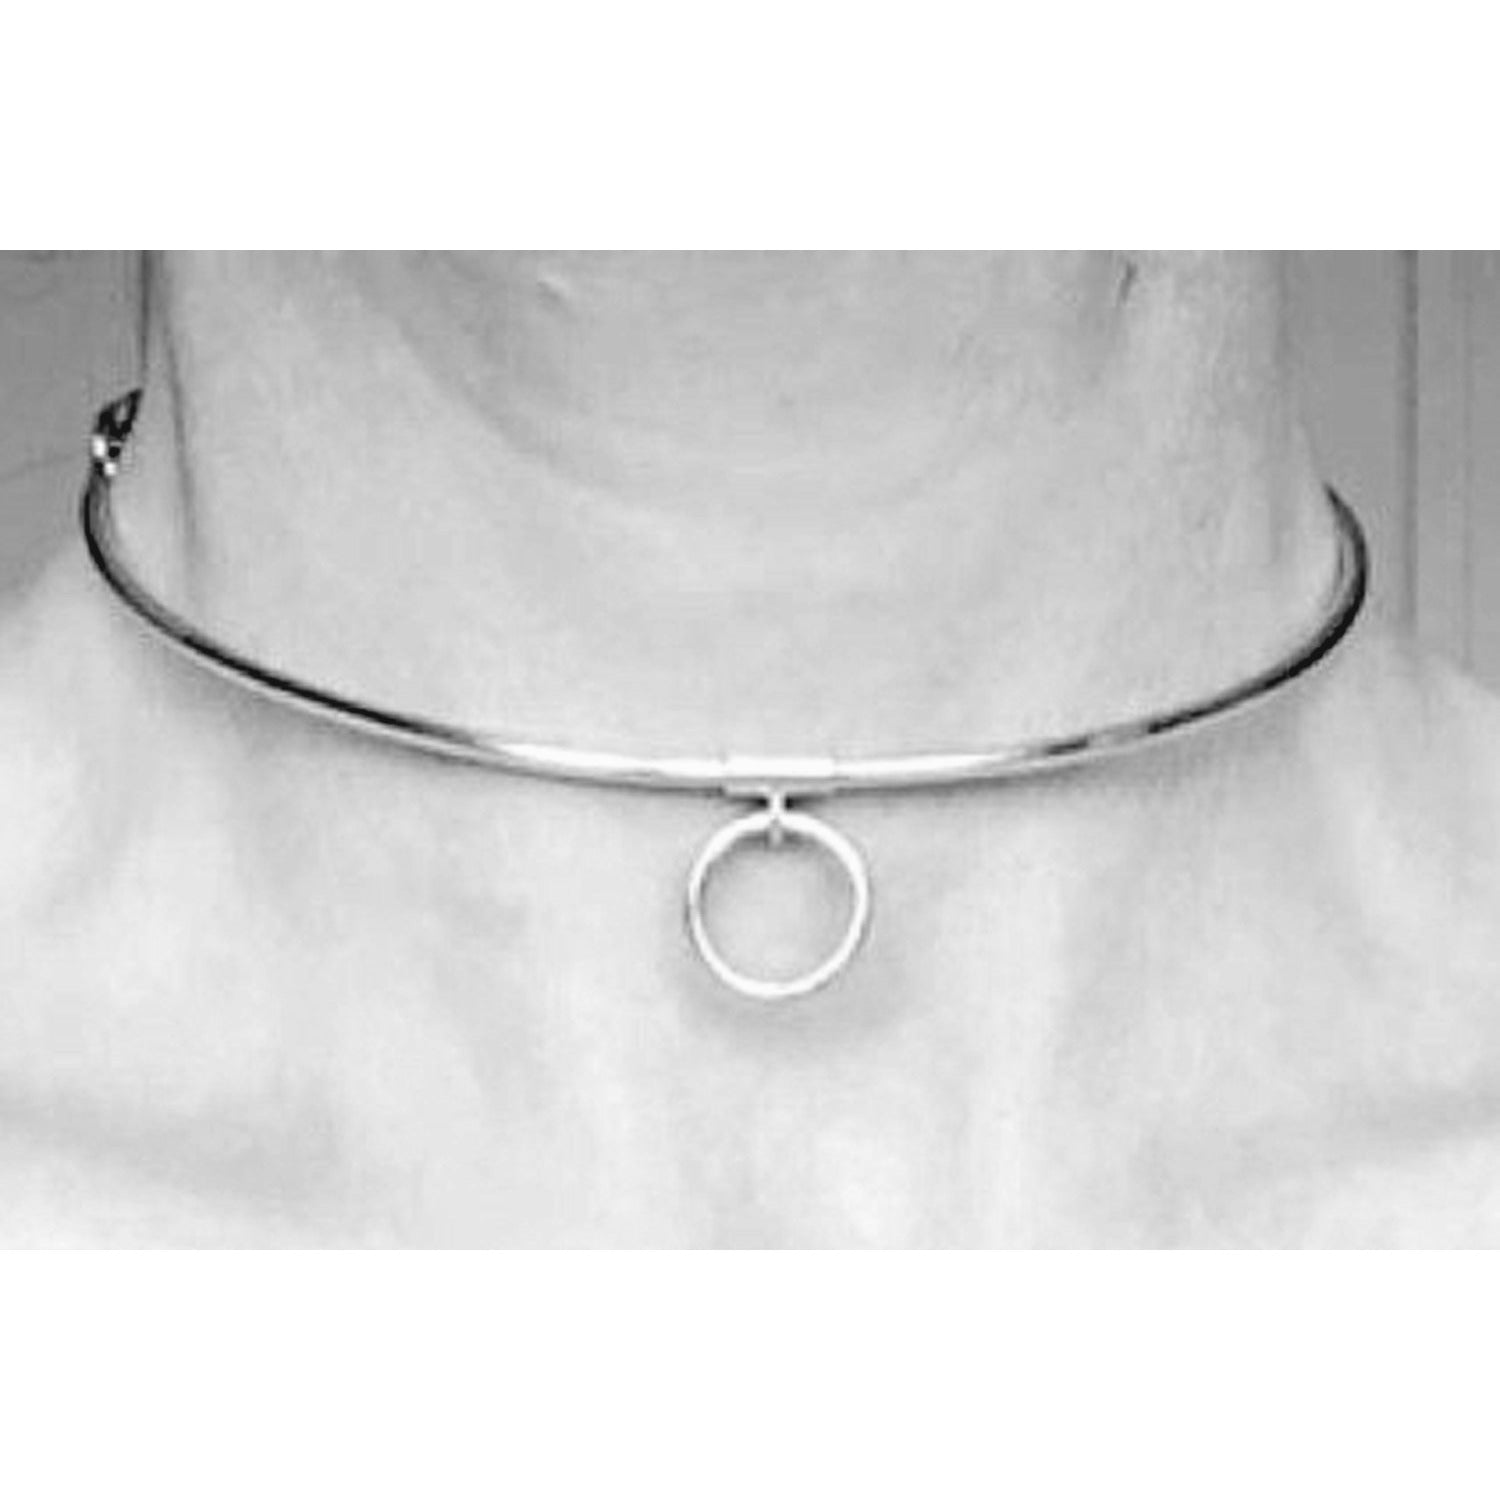 SUBMISSIVE COLLAR STERLING SILVER  (925) DISCREET O RING